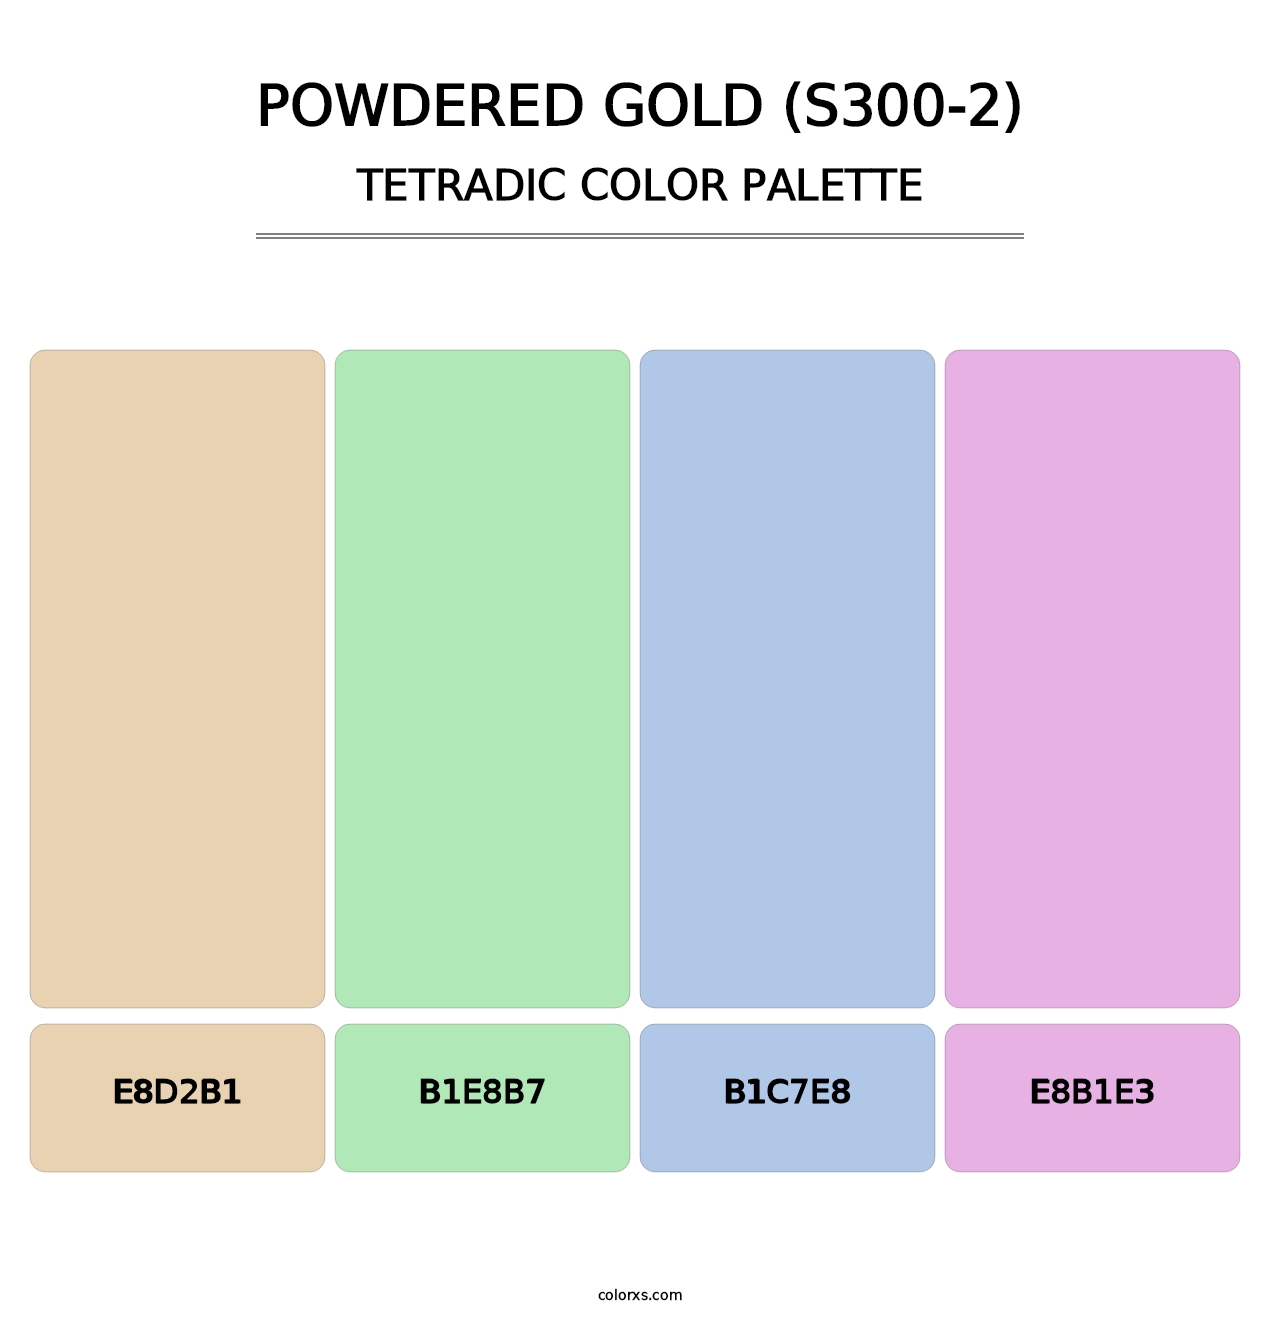 Powdered Gold (S300-2) - Tetradic Color Palette